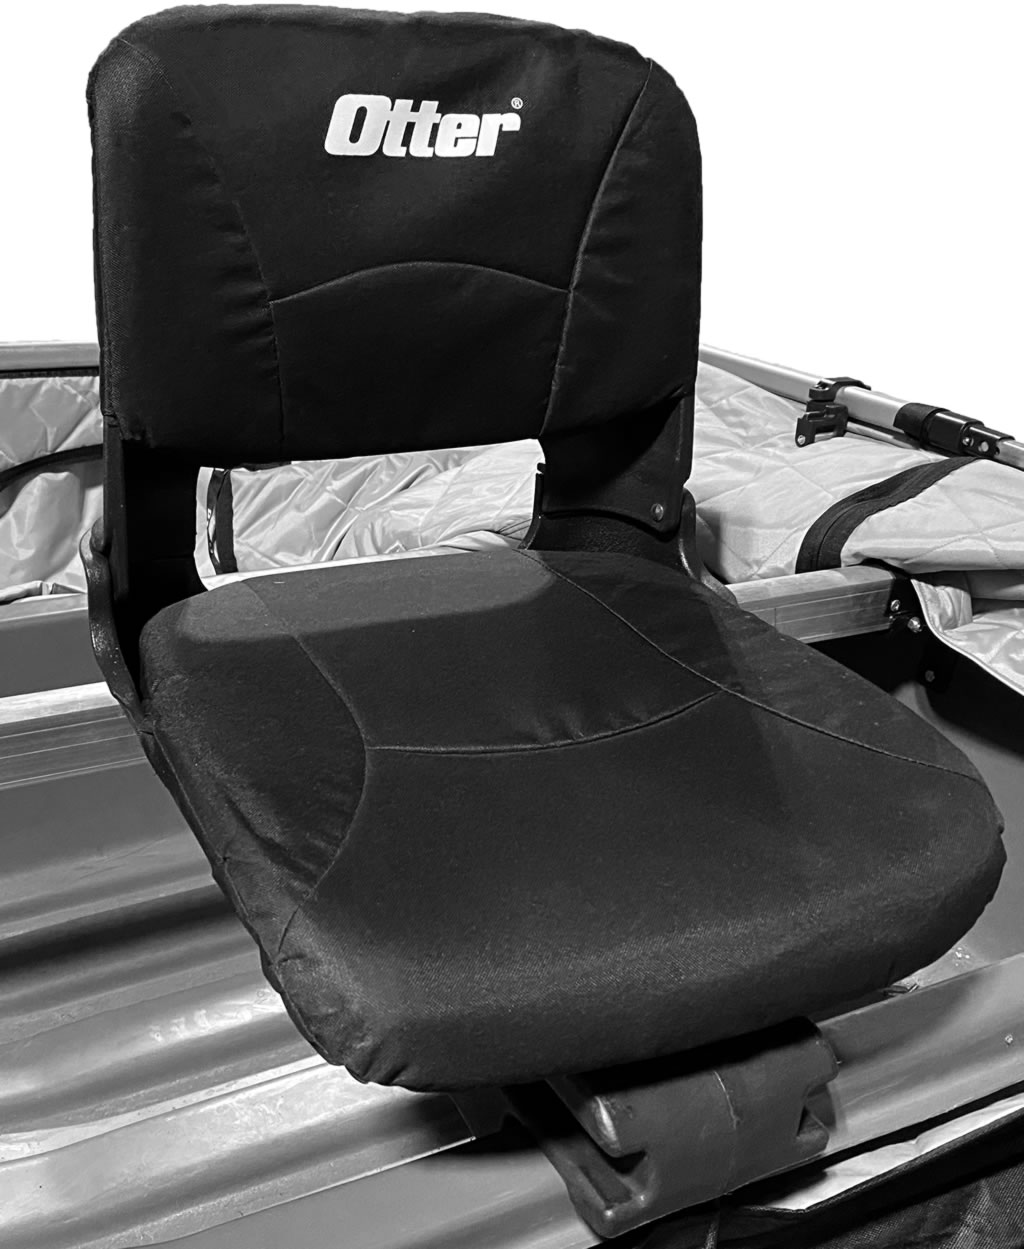 Seat - Otter Outdoors